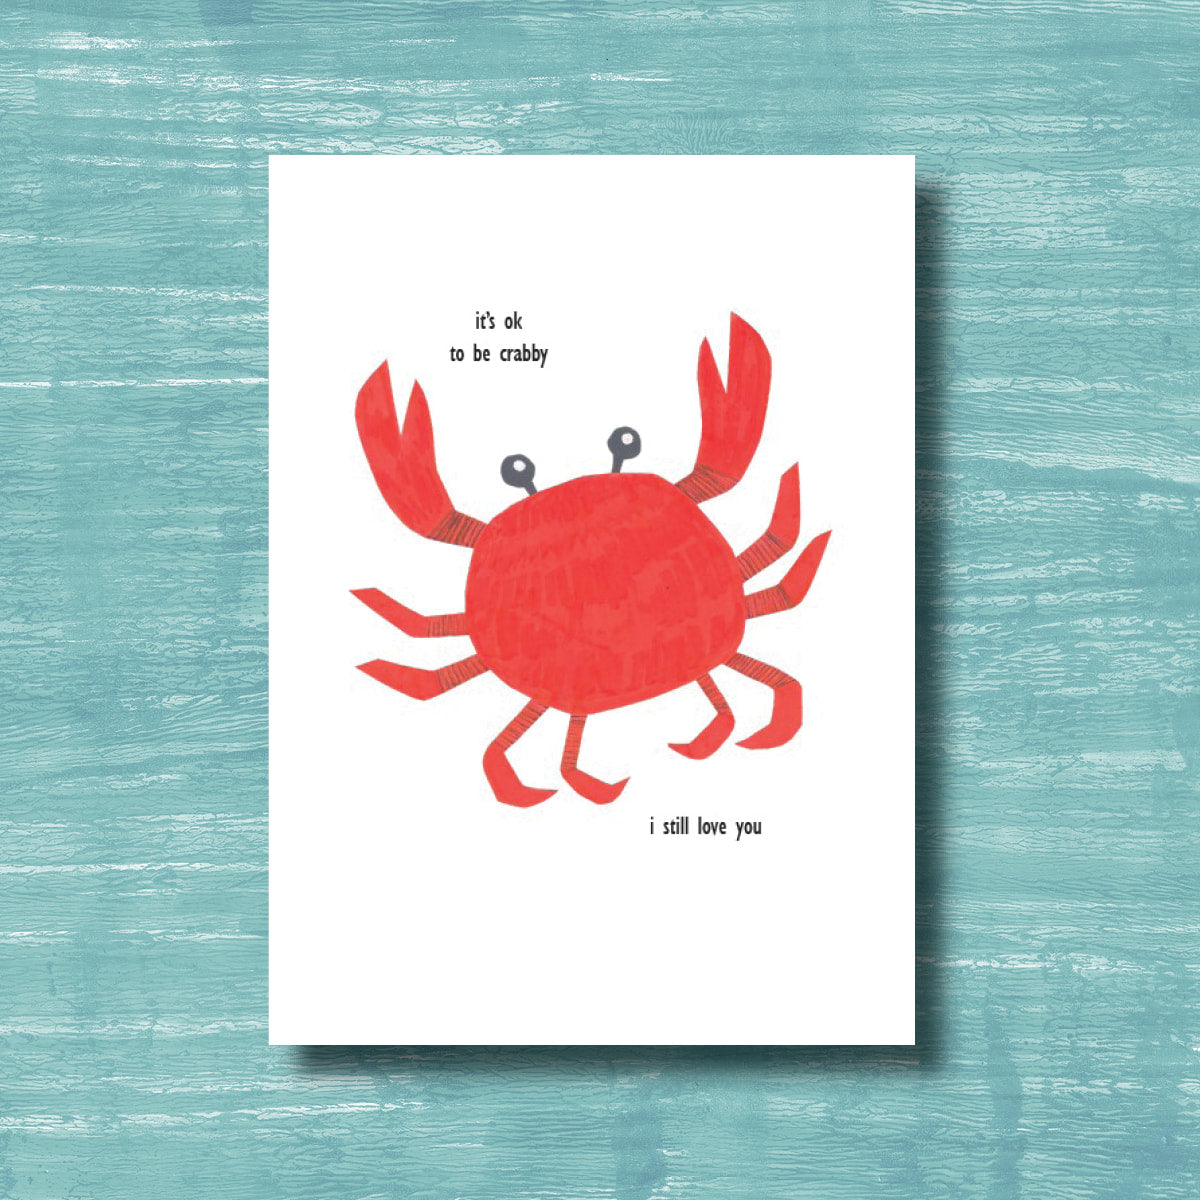 Crabby - greeting card